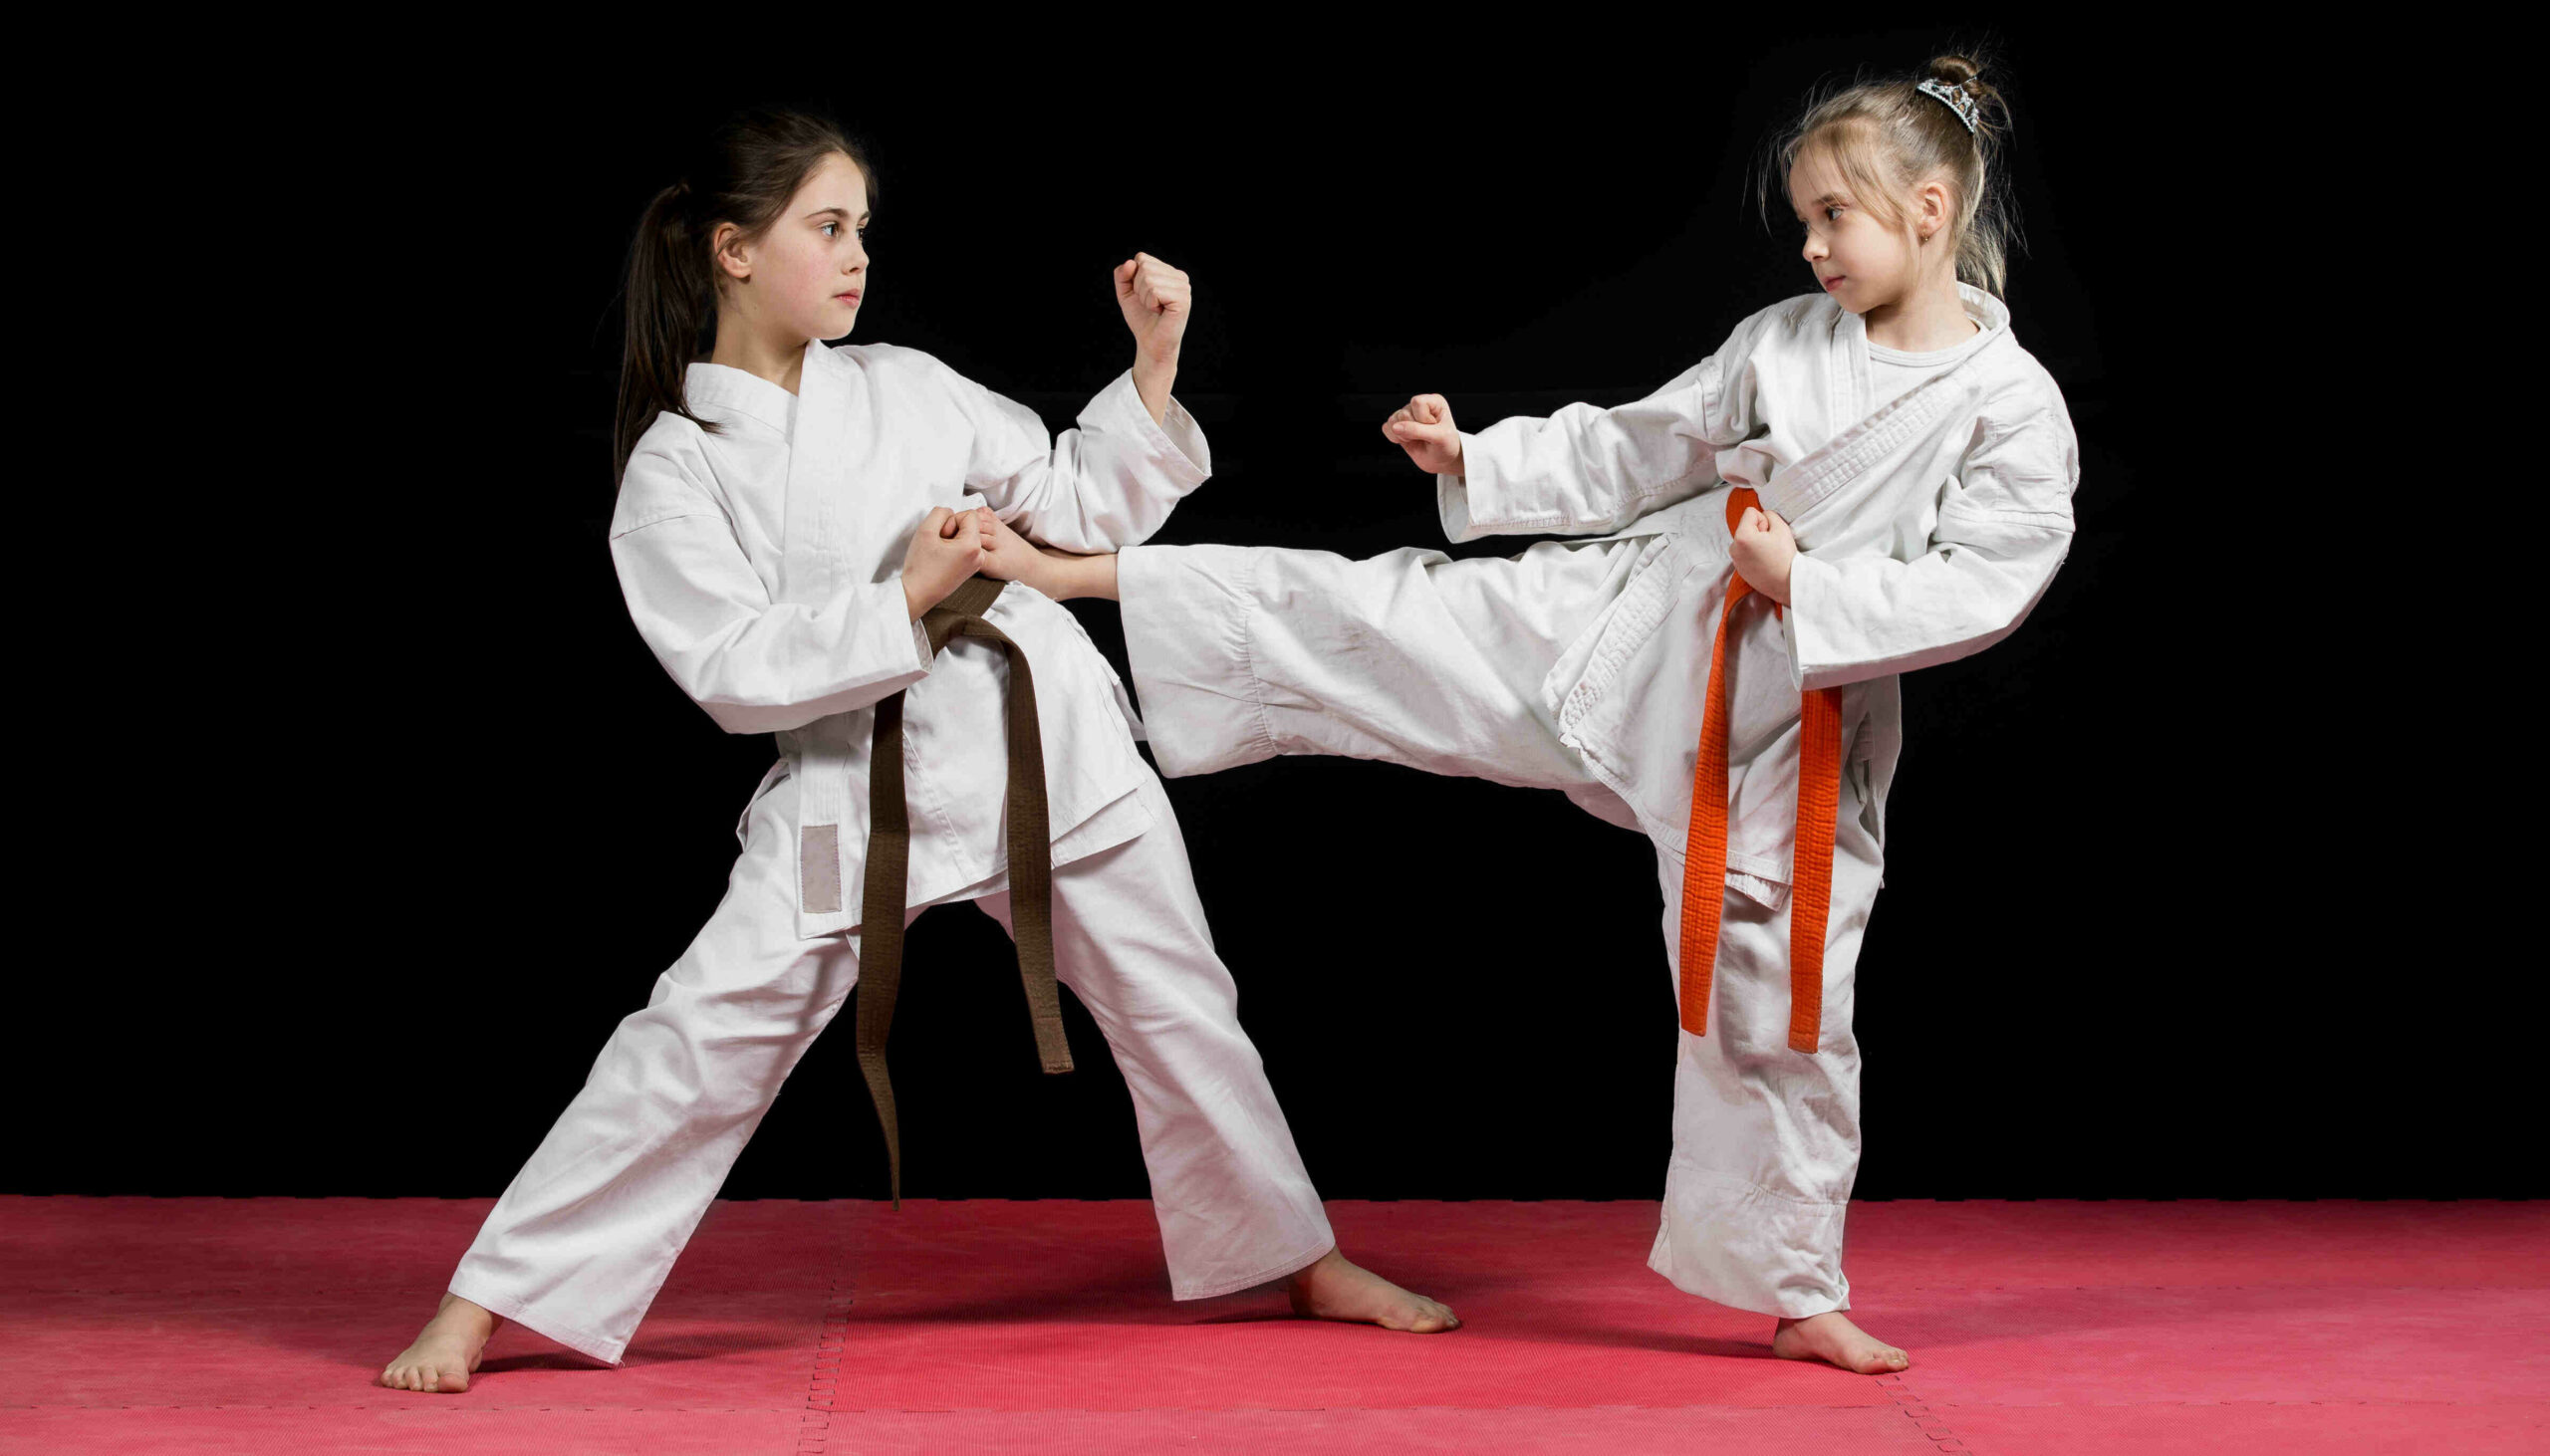 What are the negative effects of karate?